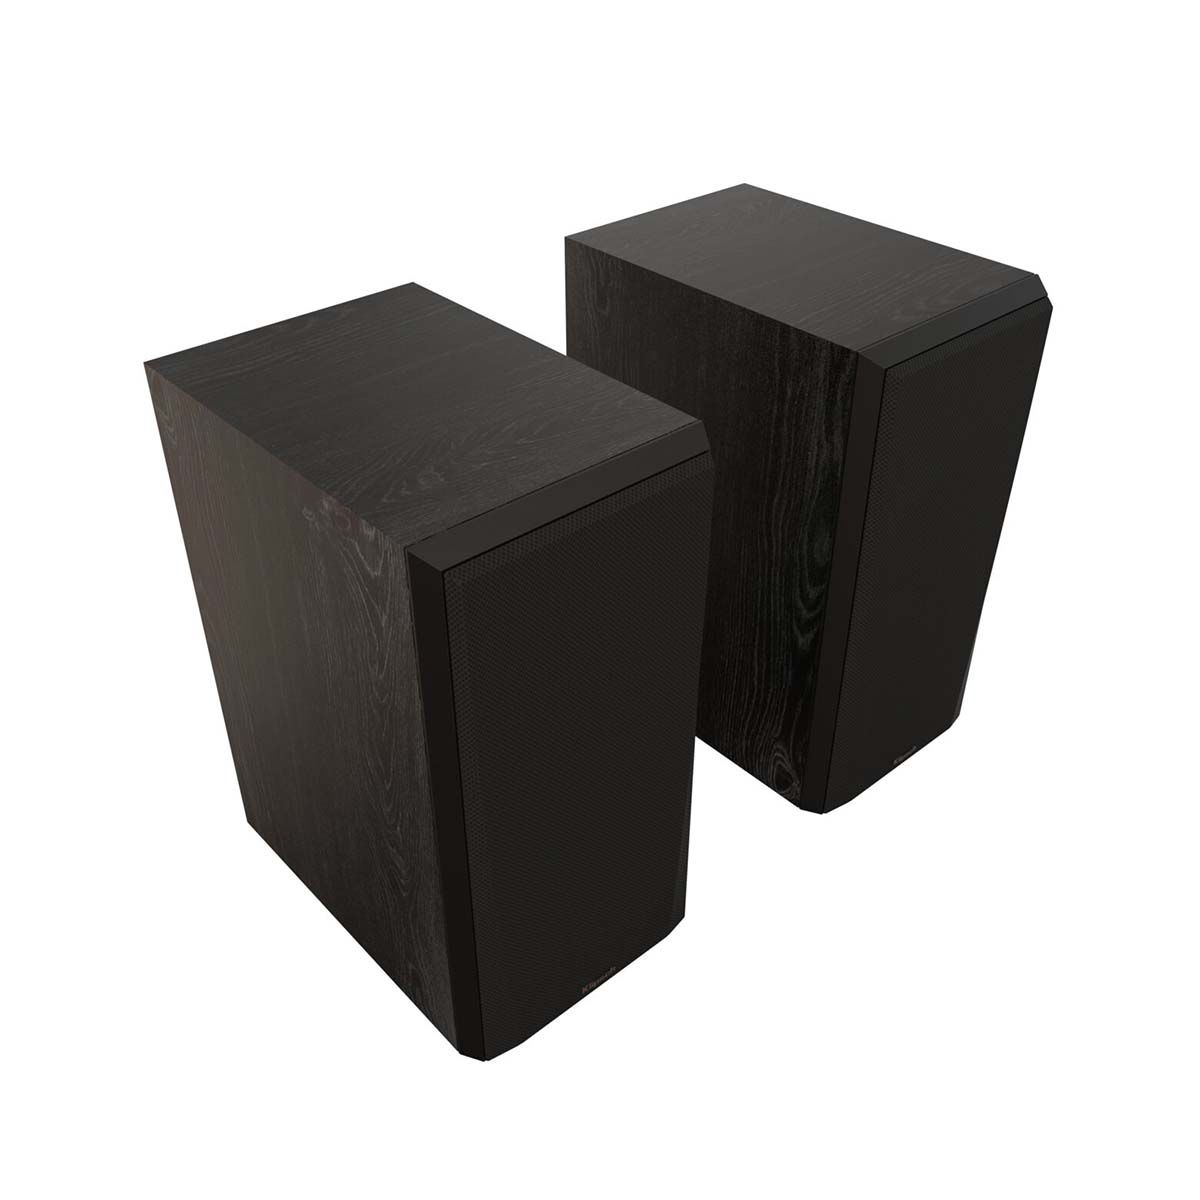 Klipsch RP-600M II Bookshelf Speakers - Ebony - Pair - angled front view of pair with grills